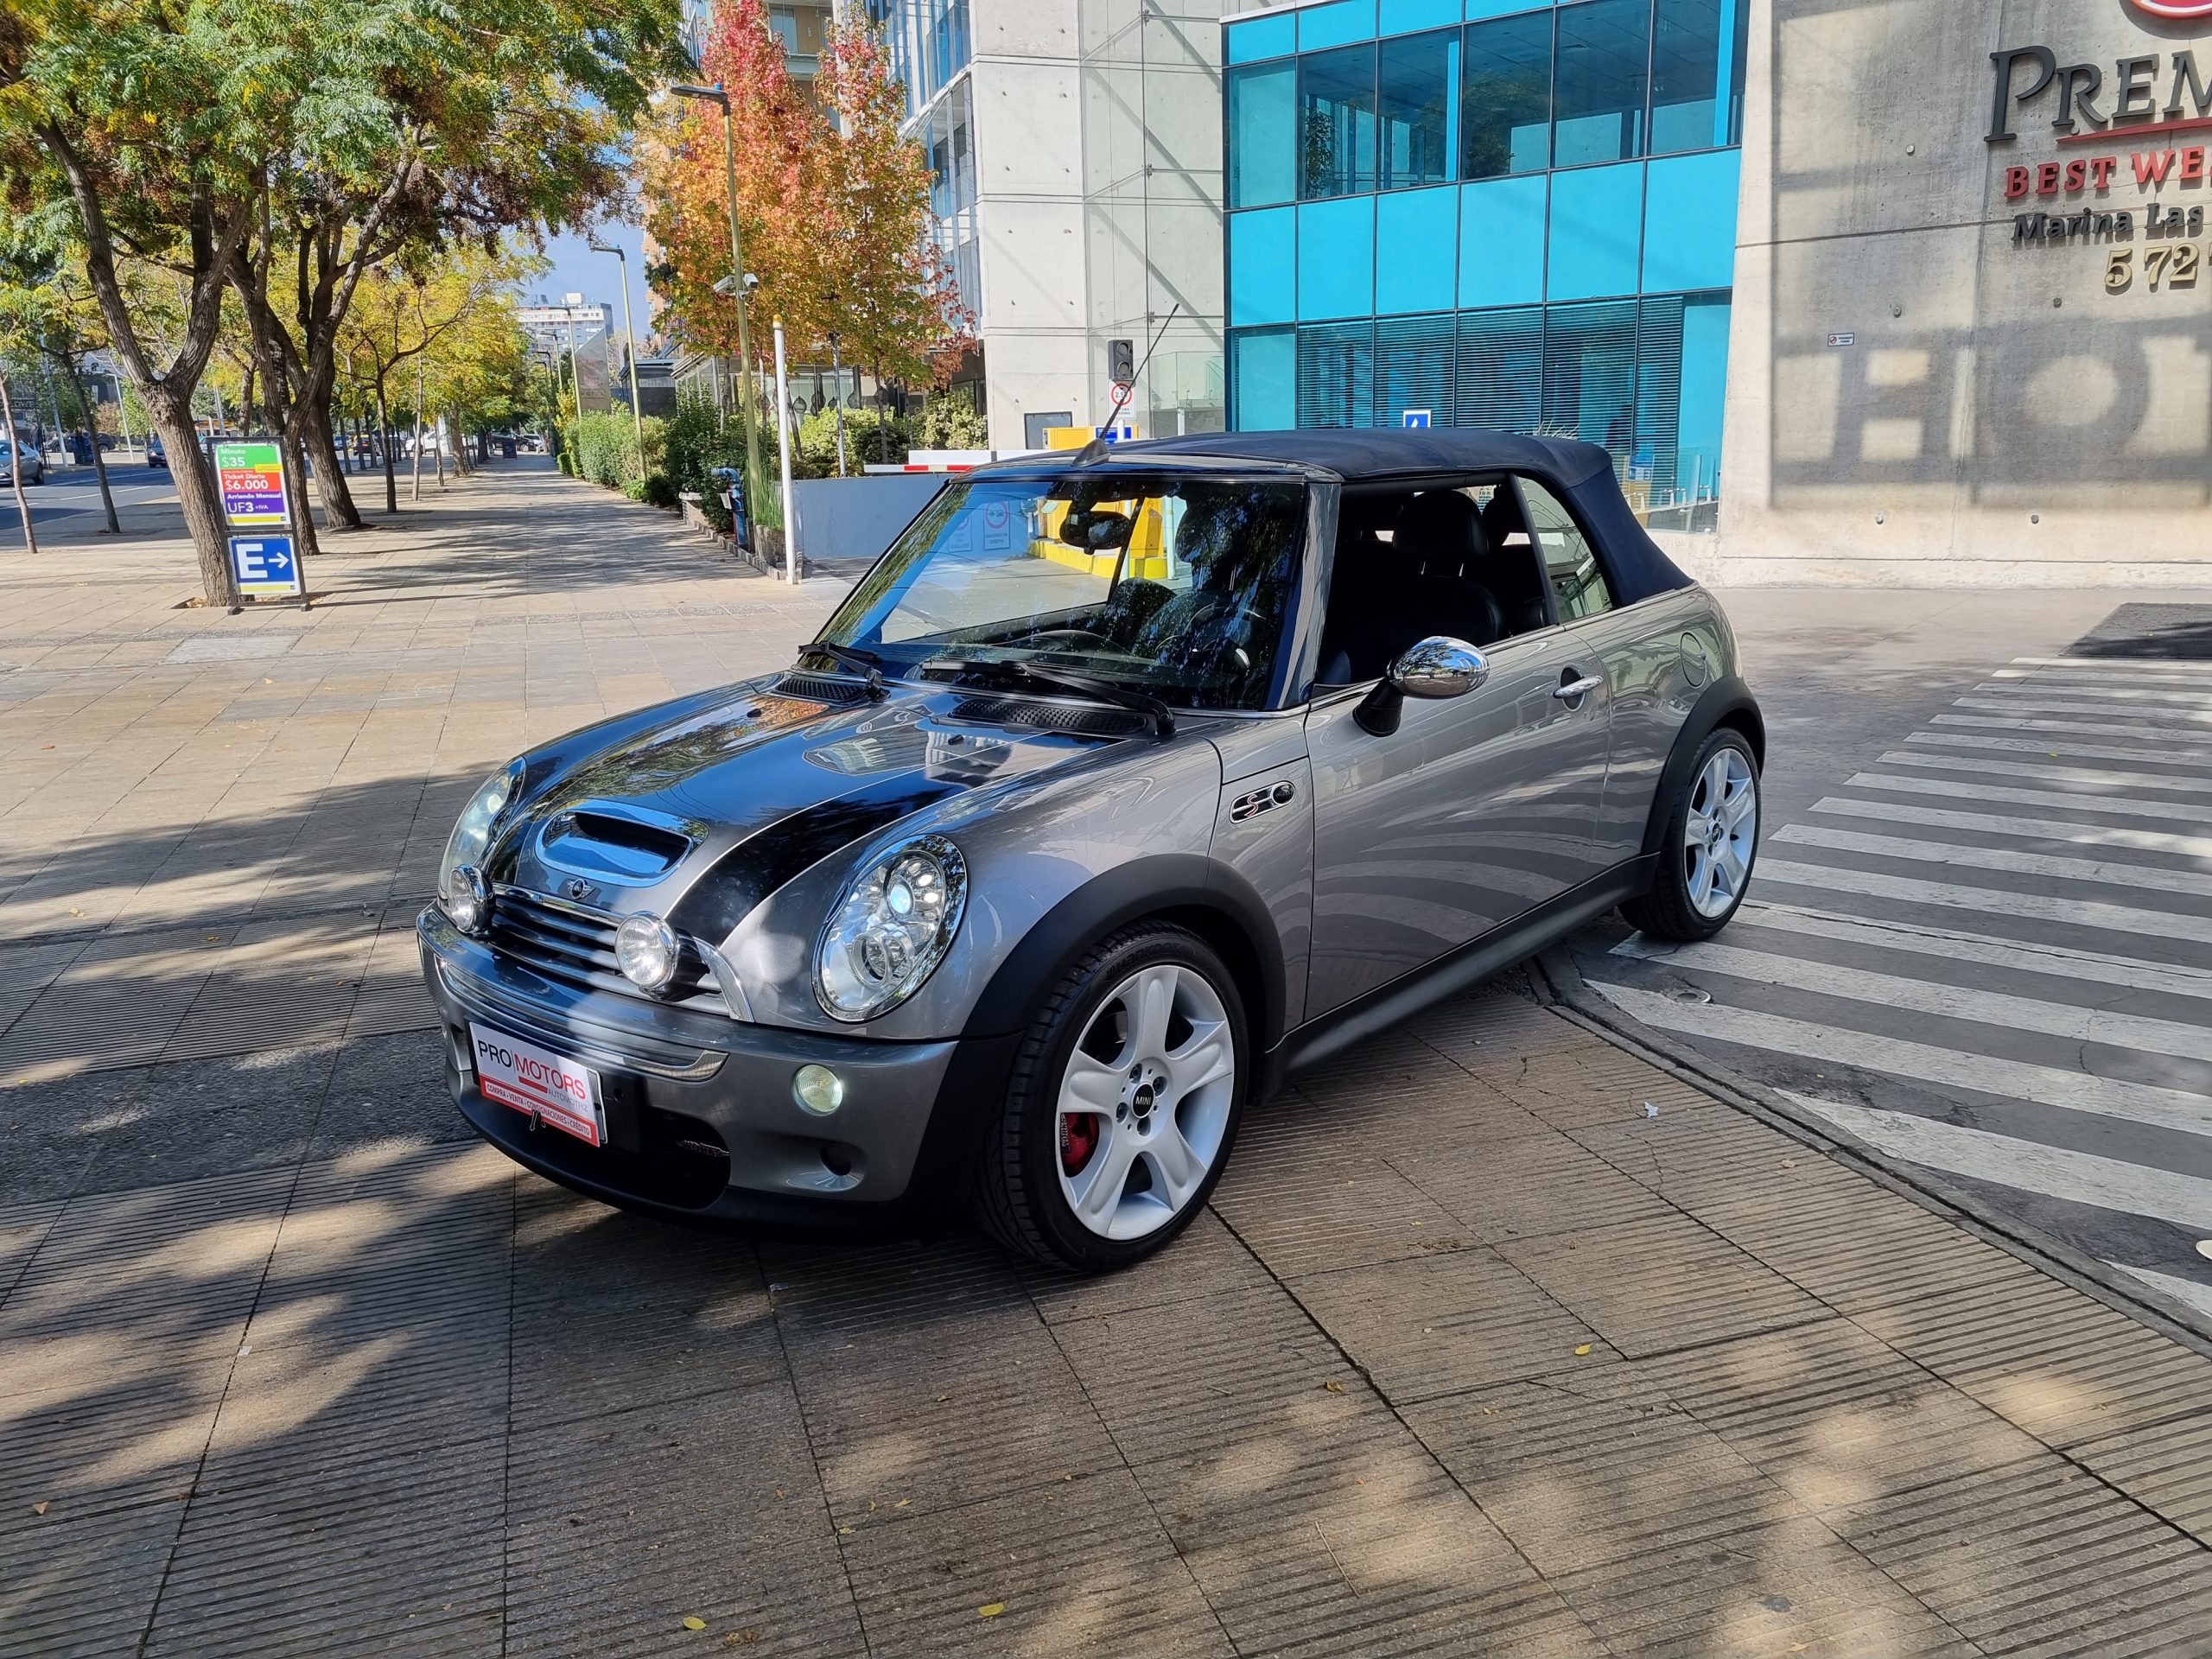 2006 Mini Cooper S Cabriolet 6 MT Supercharged